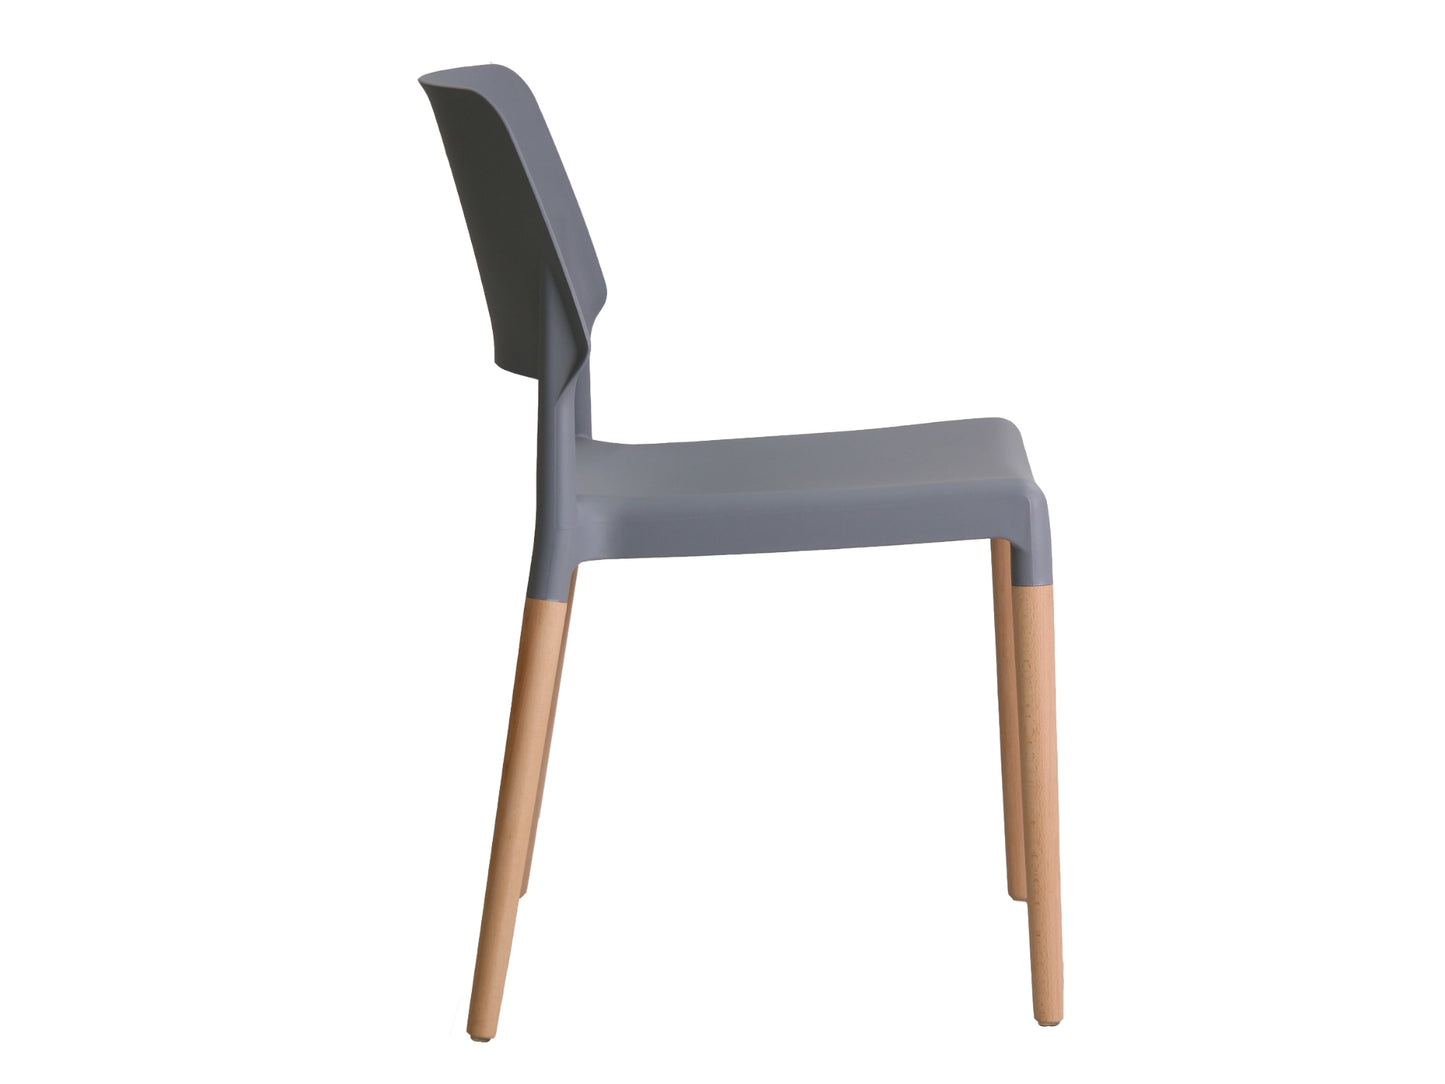 Riva Dining Chair in Grey (2 Pack)